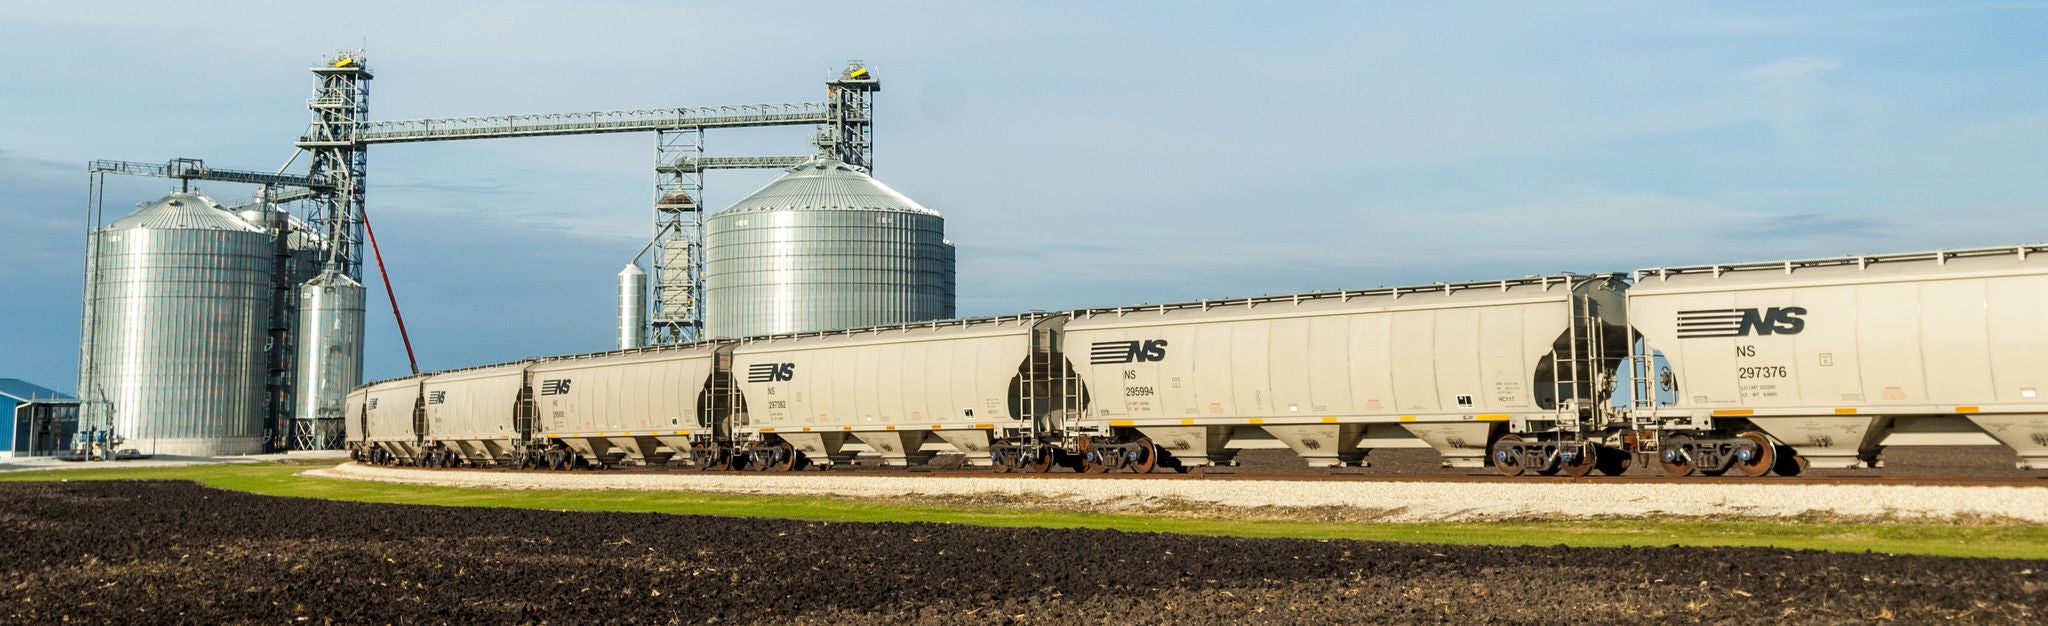 Wide view of Norfolk Southern railcars in the process of shipping agricultural products and industrial forest products